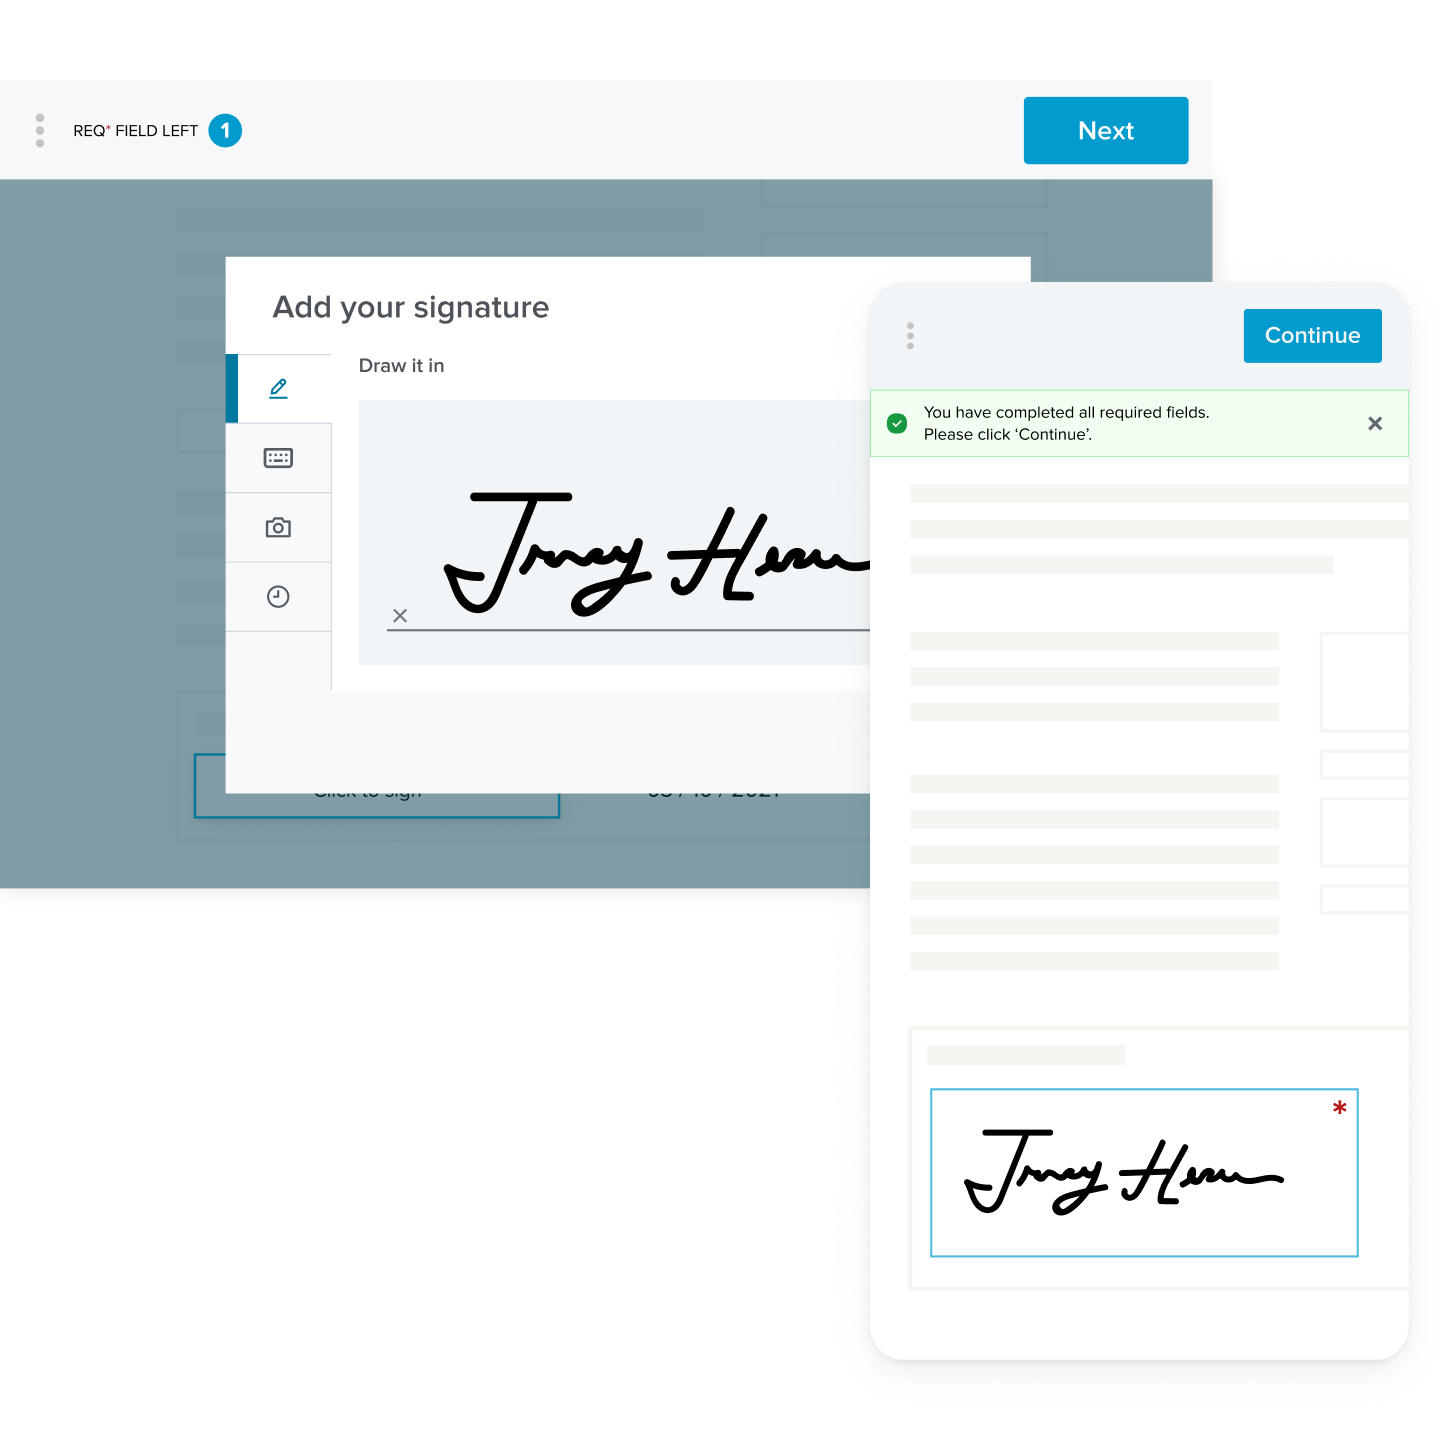 The esignature interface, showing a signature that has been added to a form, on desktop and mobile devices